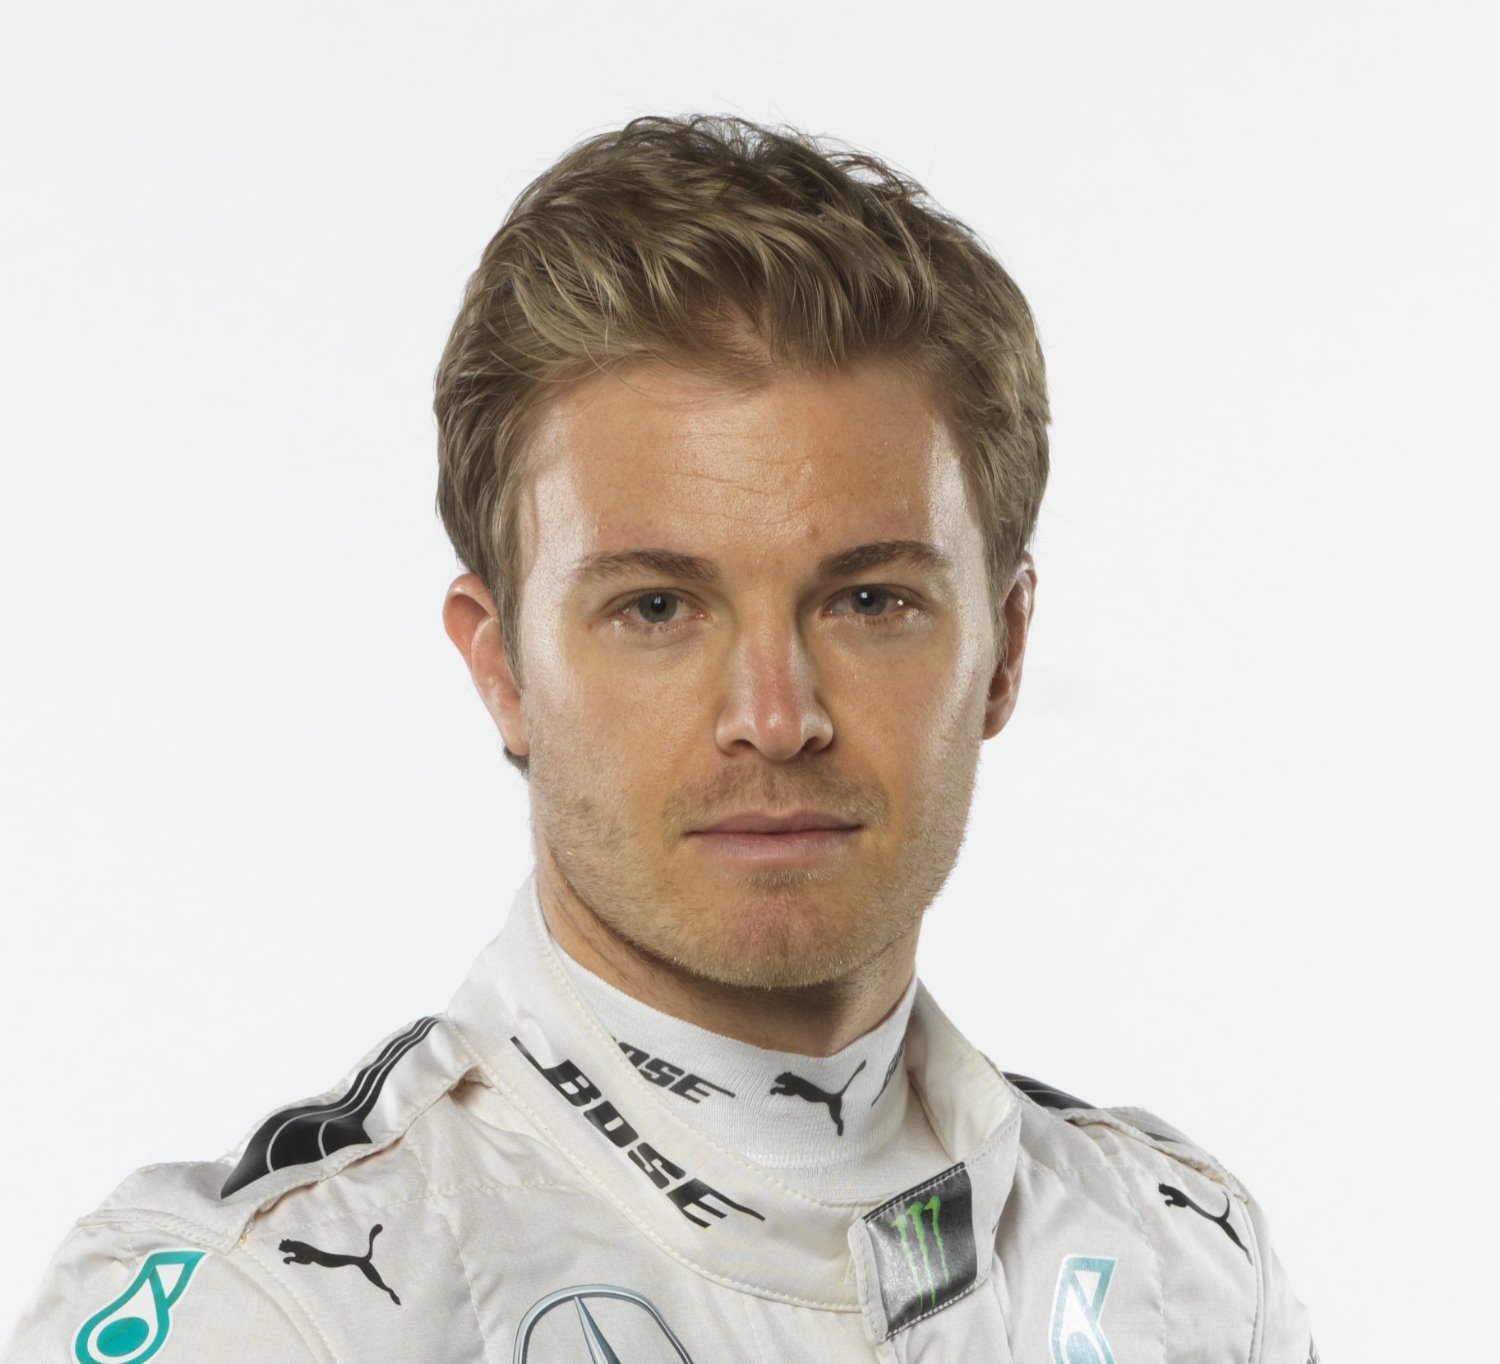 Hopefully German driver Nico Rosberg, chosen by Mercedes to be this year's World Champion, can revive German GP ticket sales